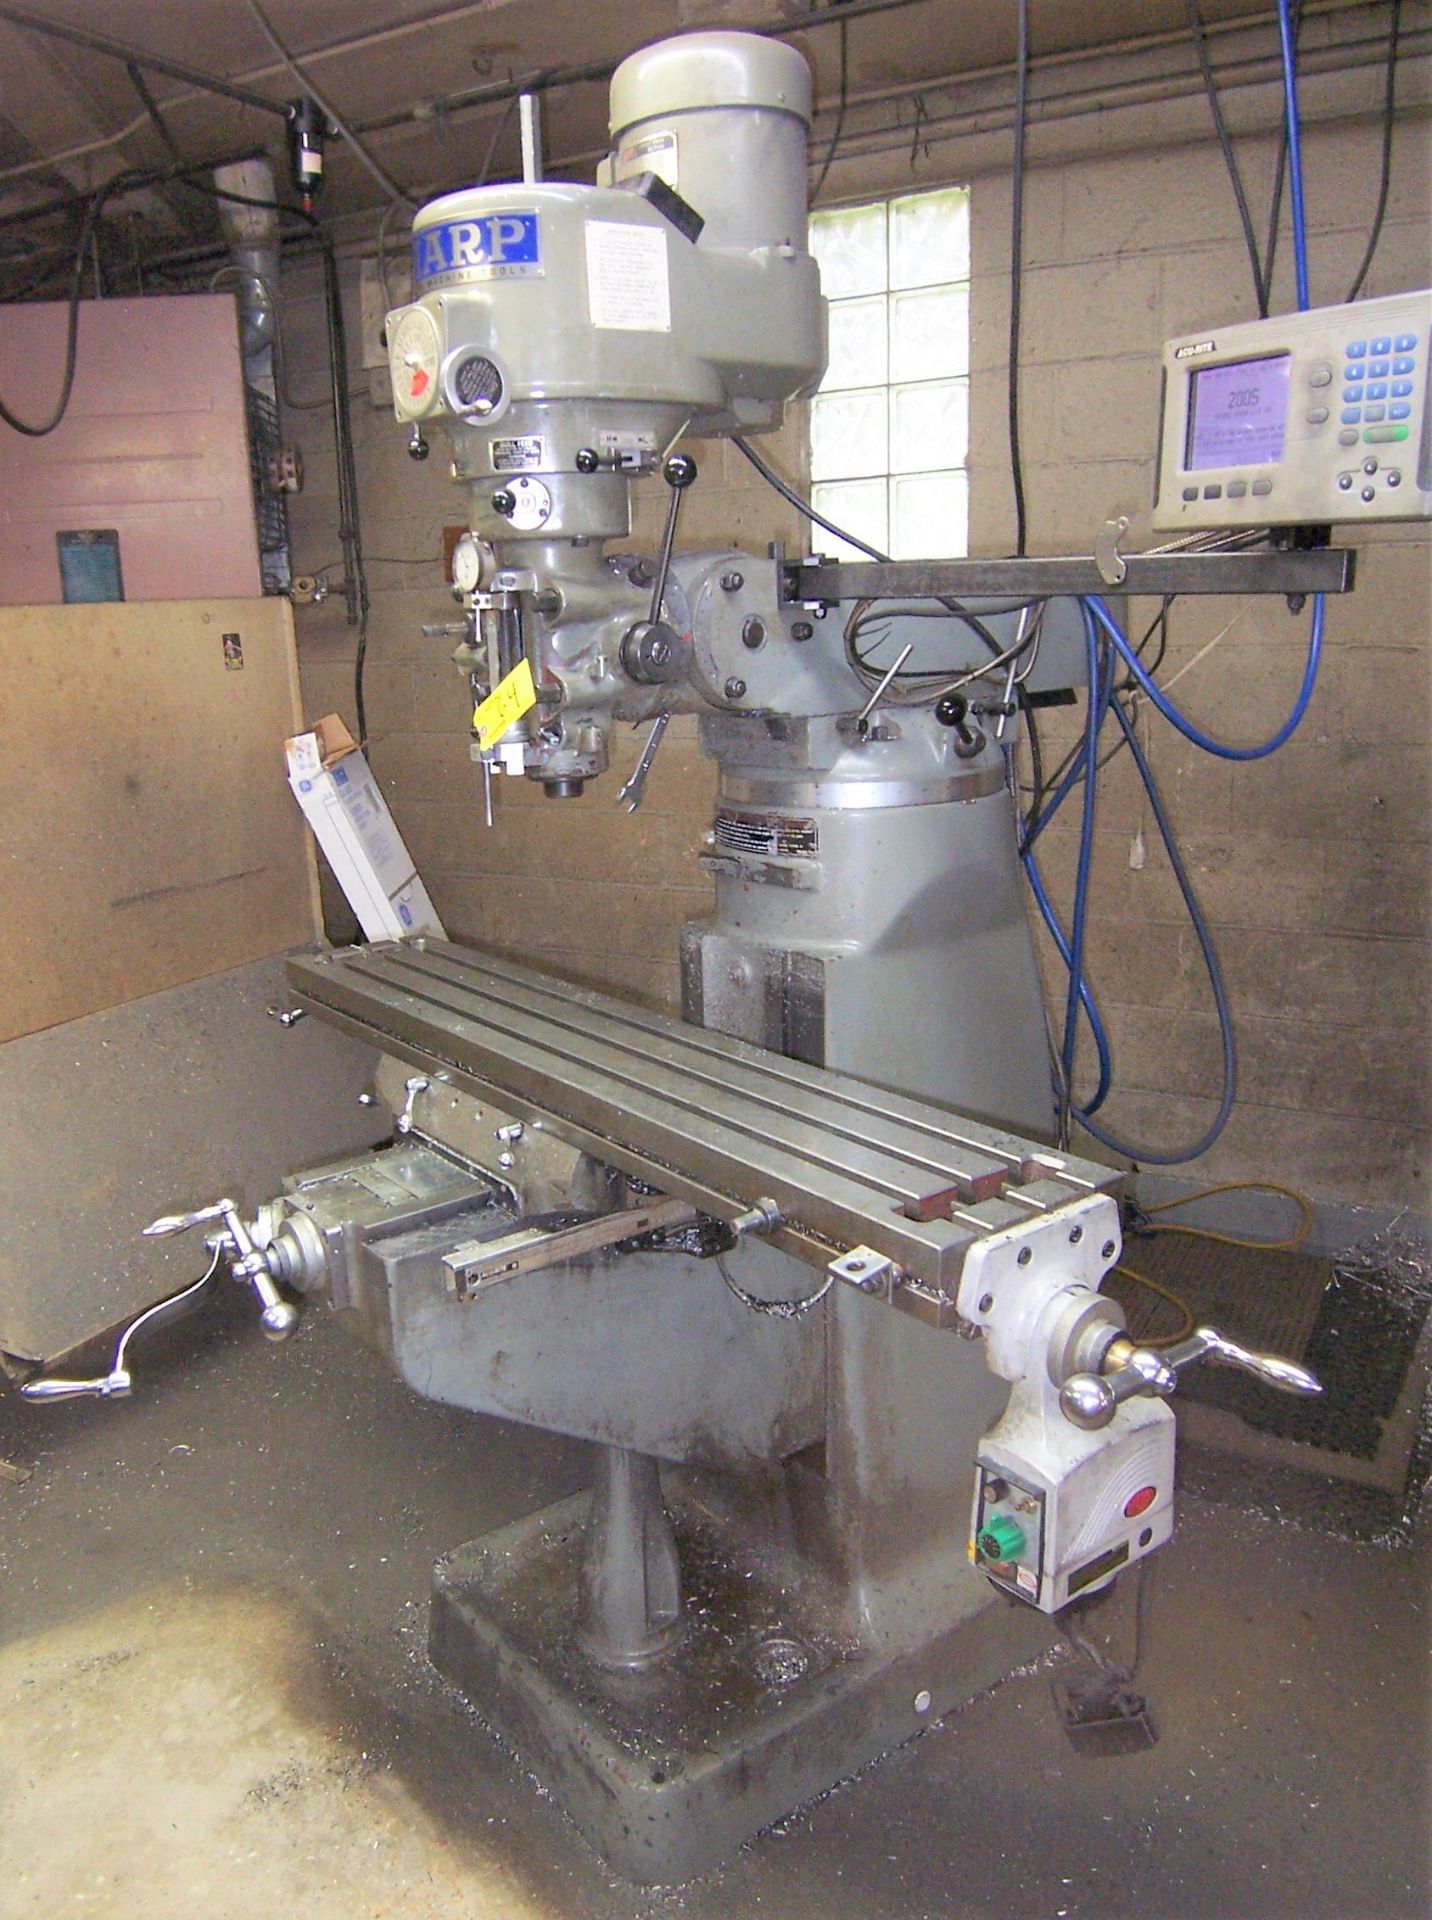 SHARP 3HP VARI-SPEED VERTICAL MILLING MACHINE WITH 9" X 50" POWER FEED TABLE, SPINDLE SPEEDS TO 4,